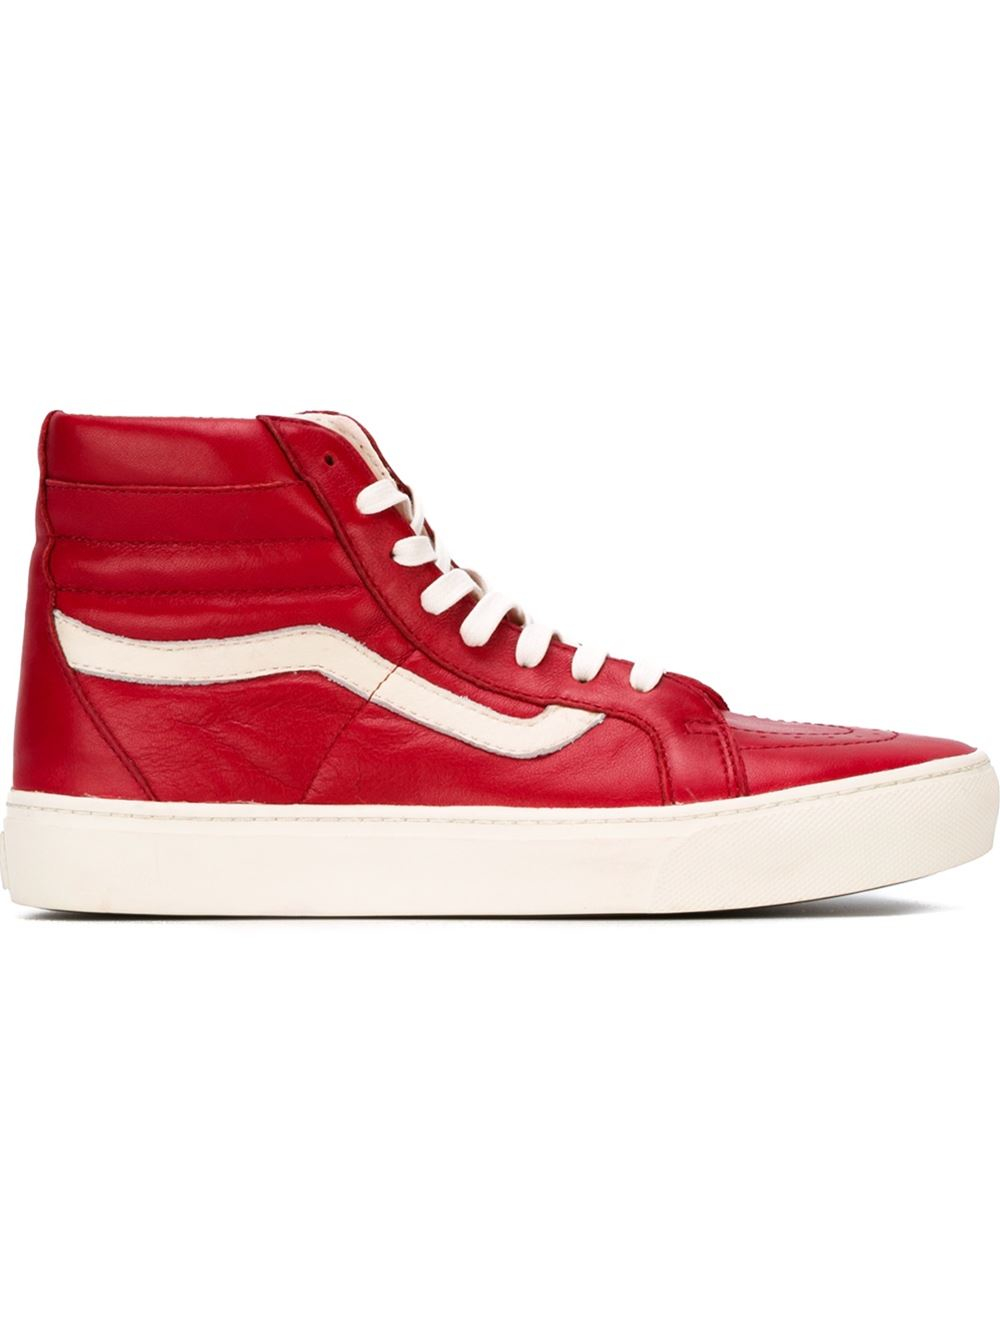 Vans Quilted-Leather High-Top Sneakers in Red for Men - Lyst